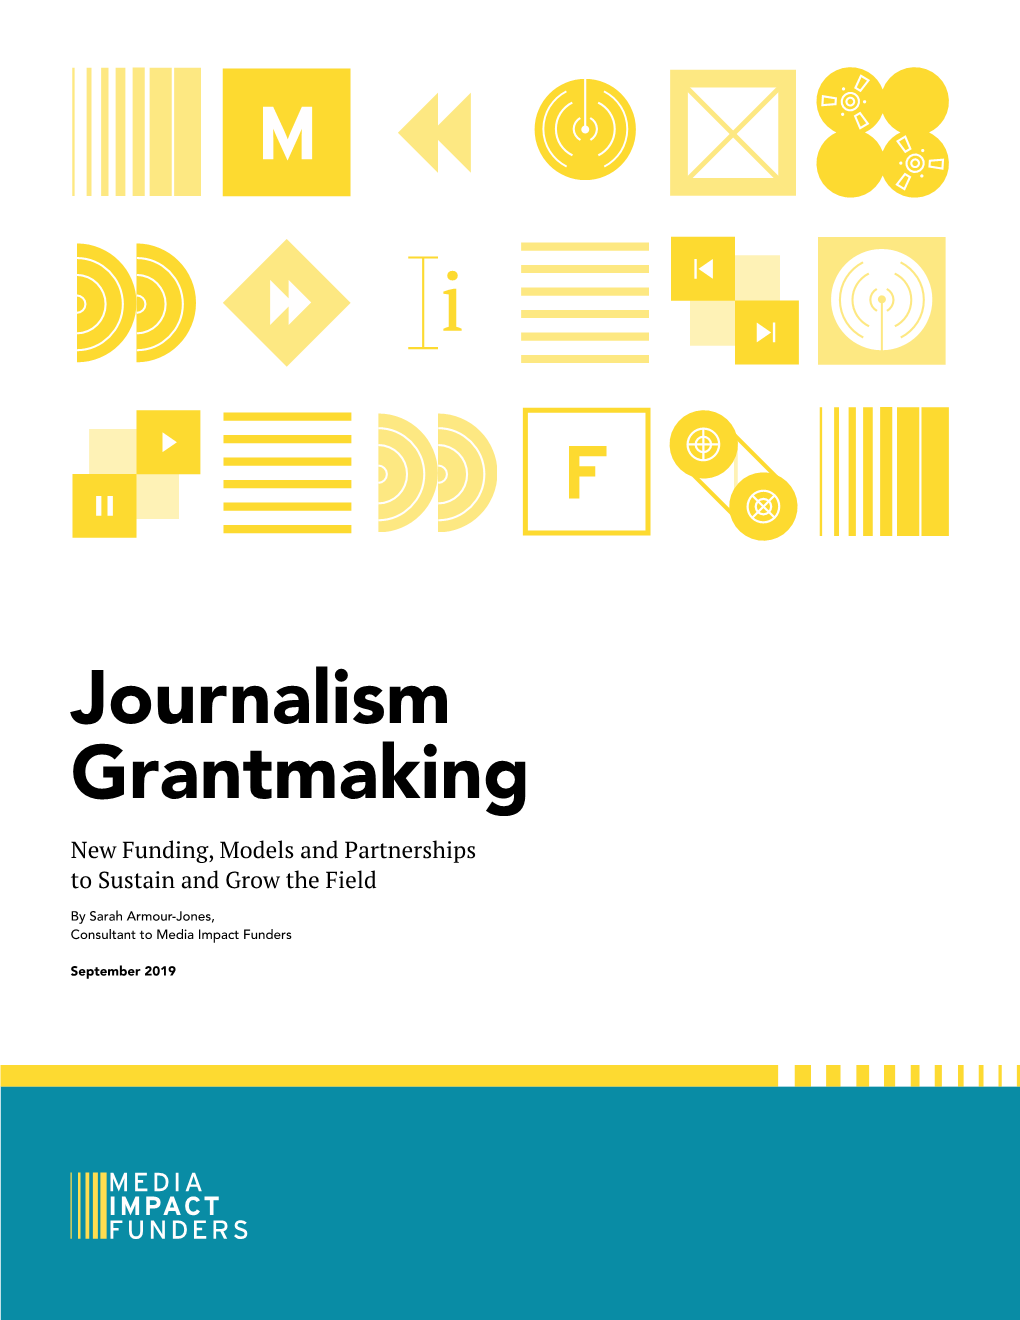 Journalism Grantmaking New Funding, Models and Partnerships to Sustain and Grow the Field